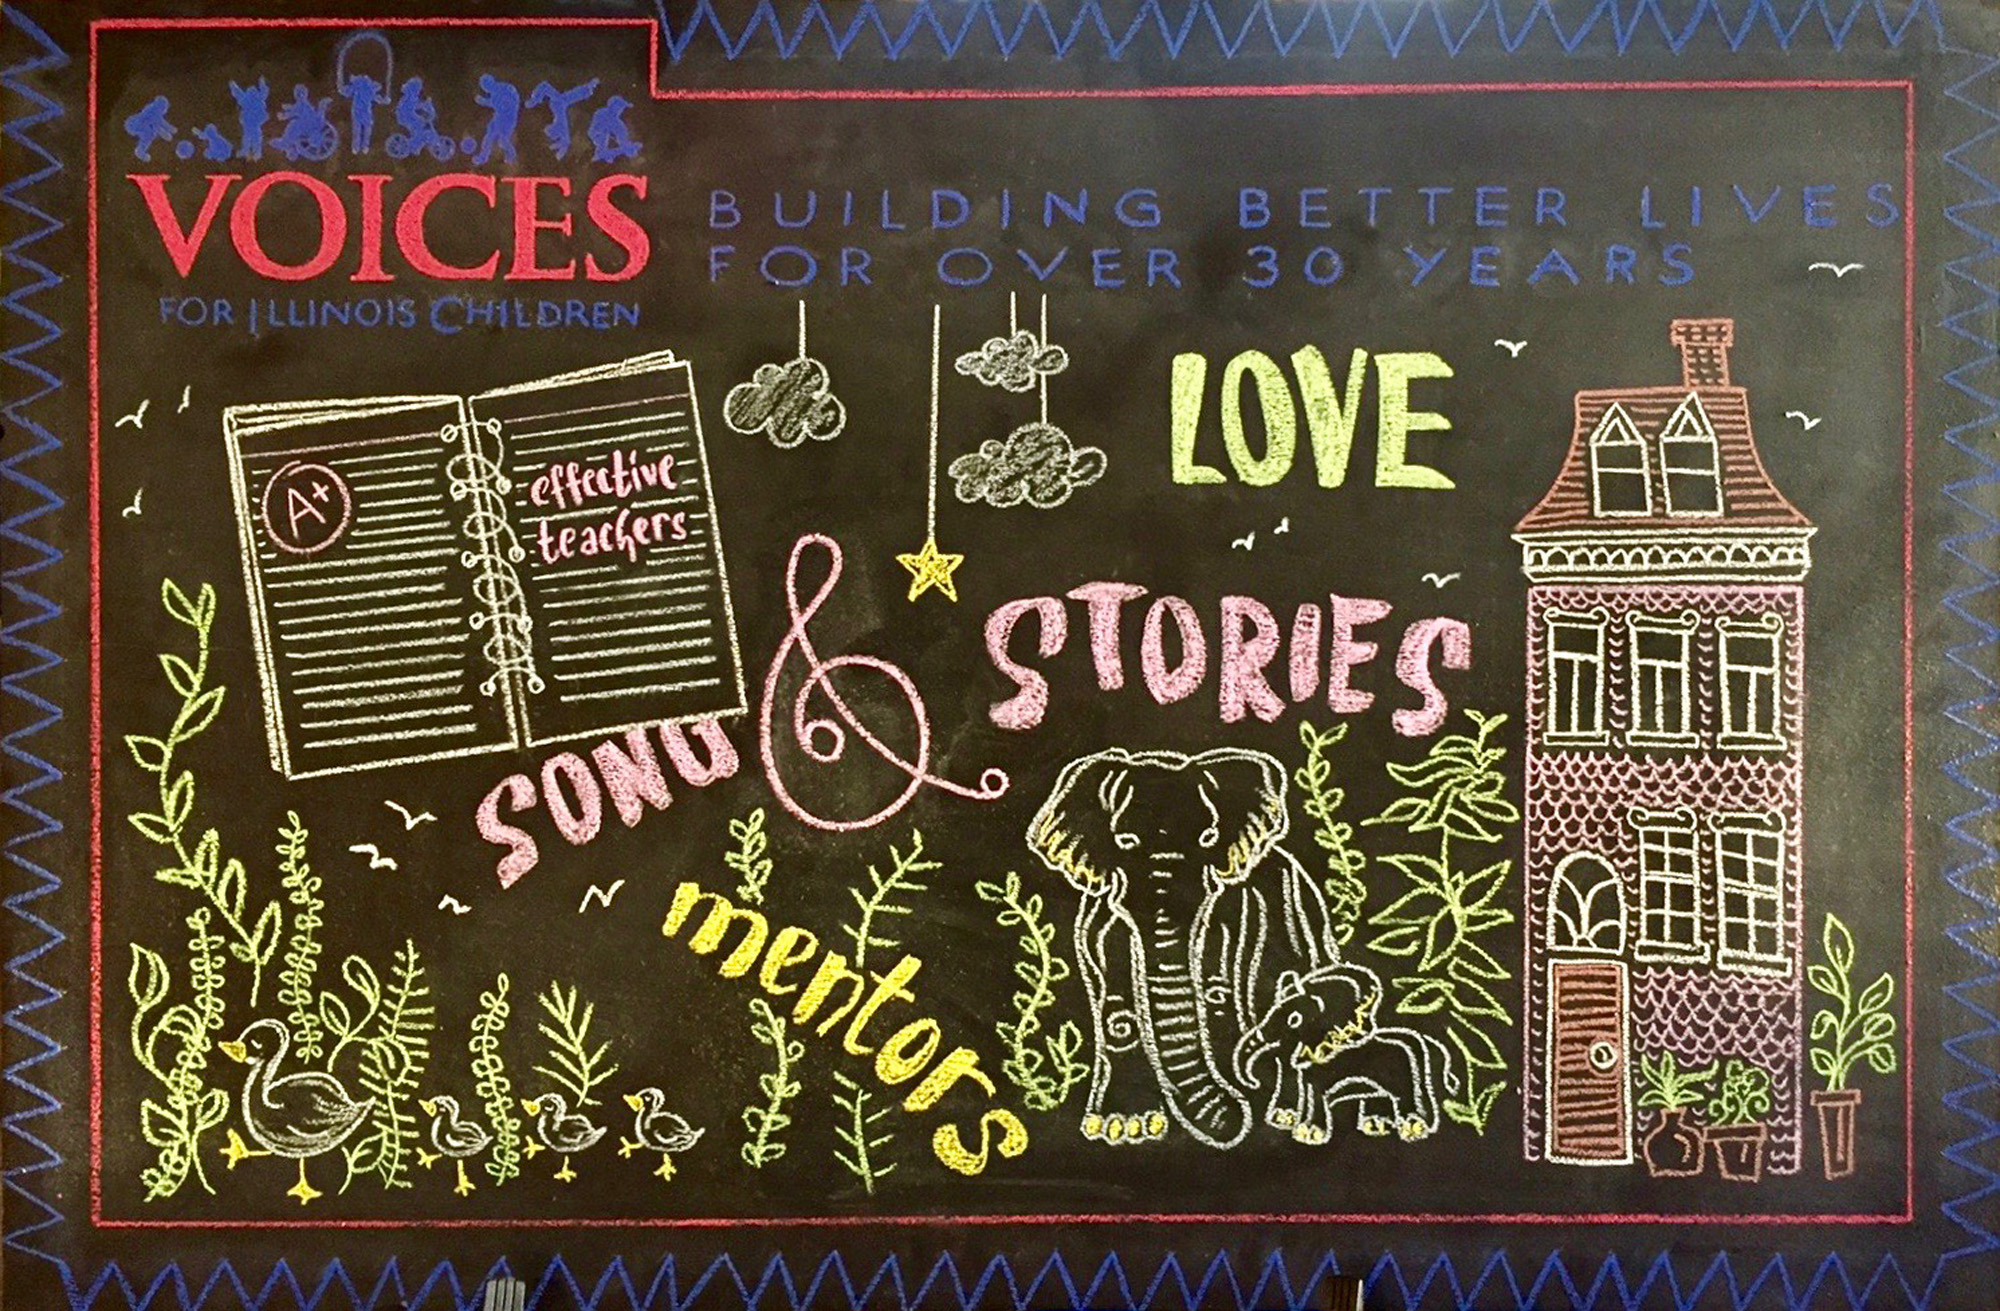 Chalkboard for Voices for IL Children